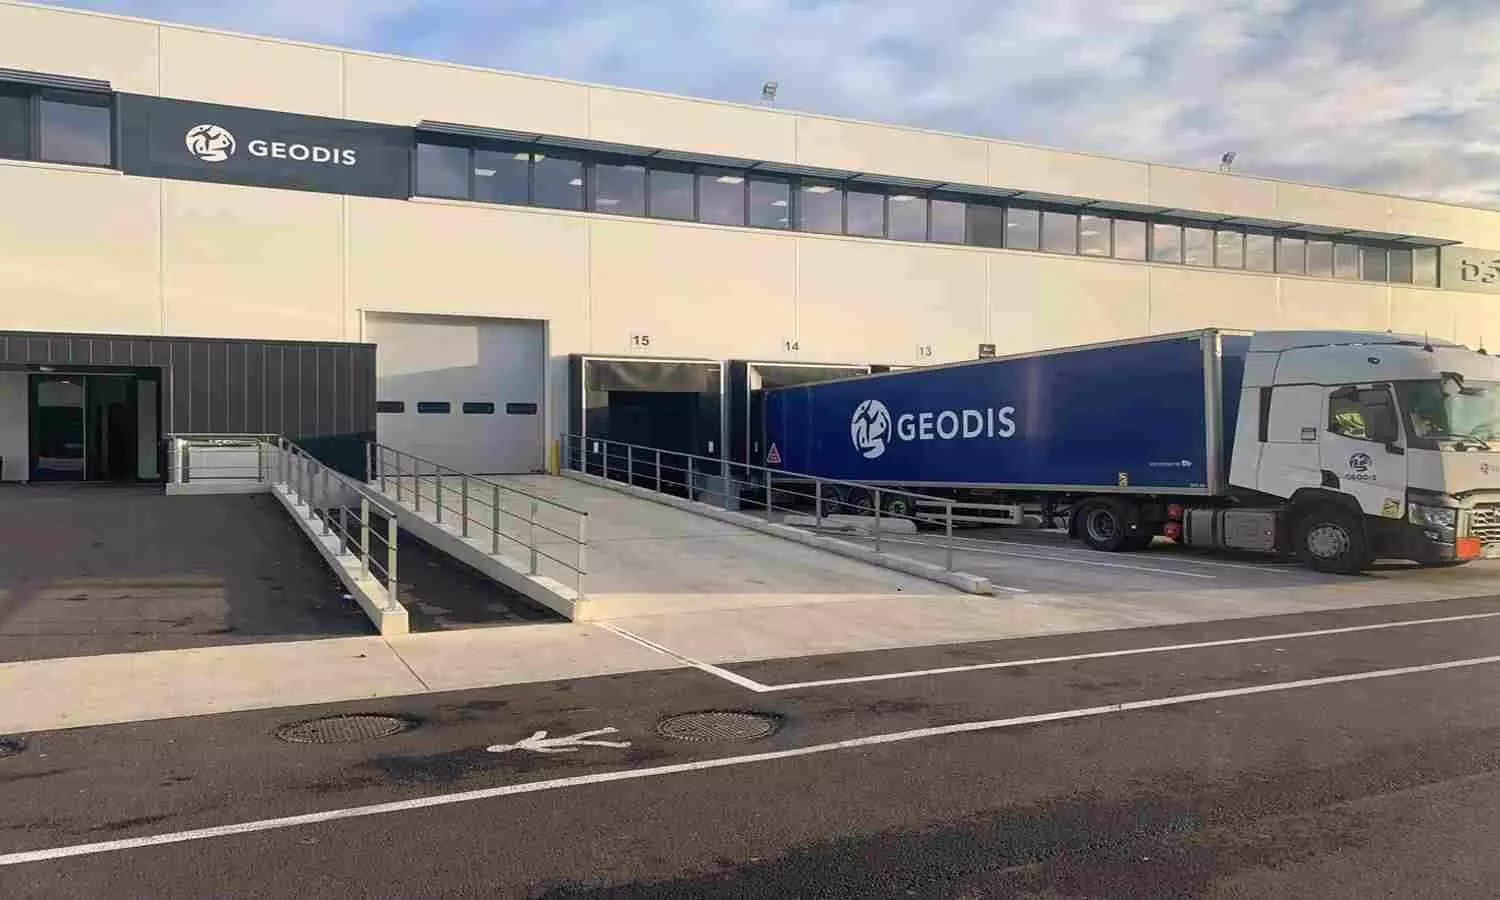 The agreement sees WFS handling staff operating GEODIS’ brand new 4,000 sq mt cargo facility at Paris CDG